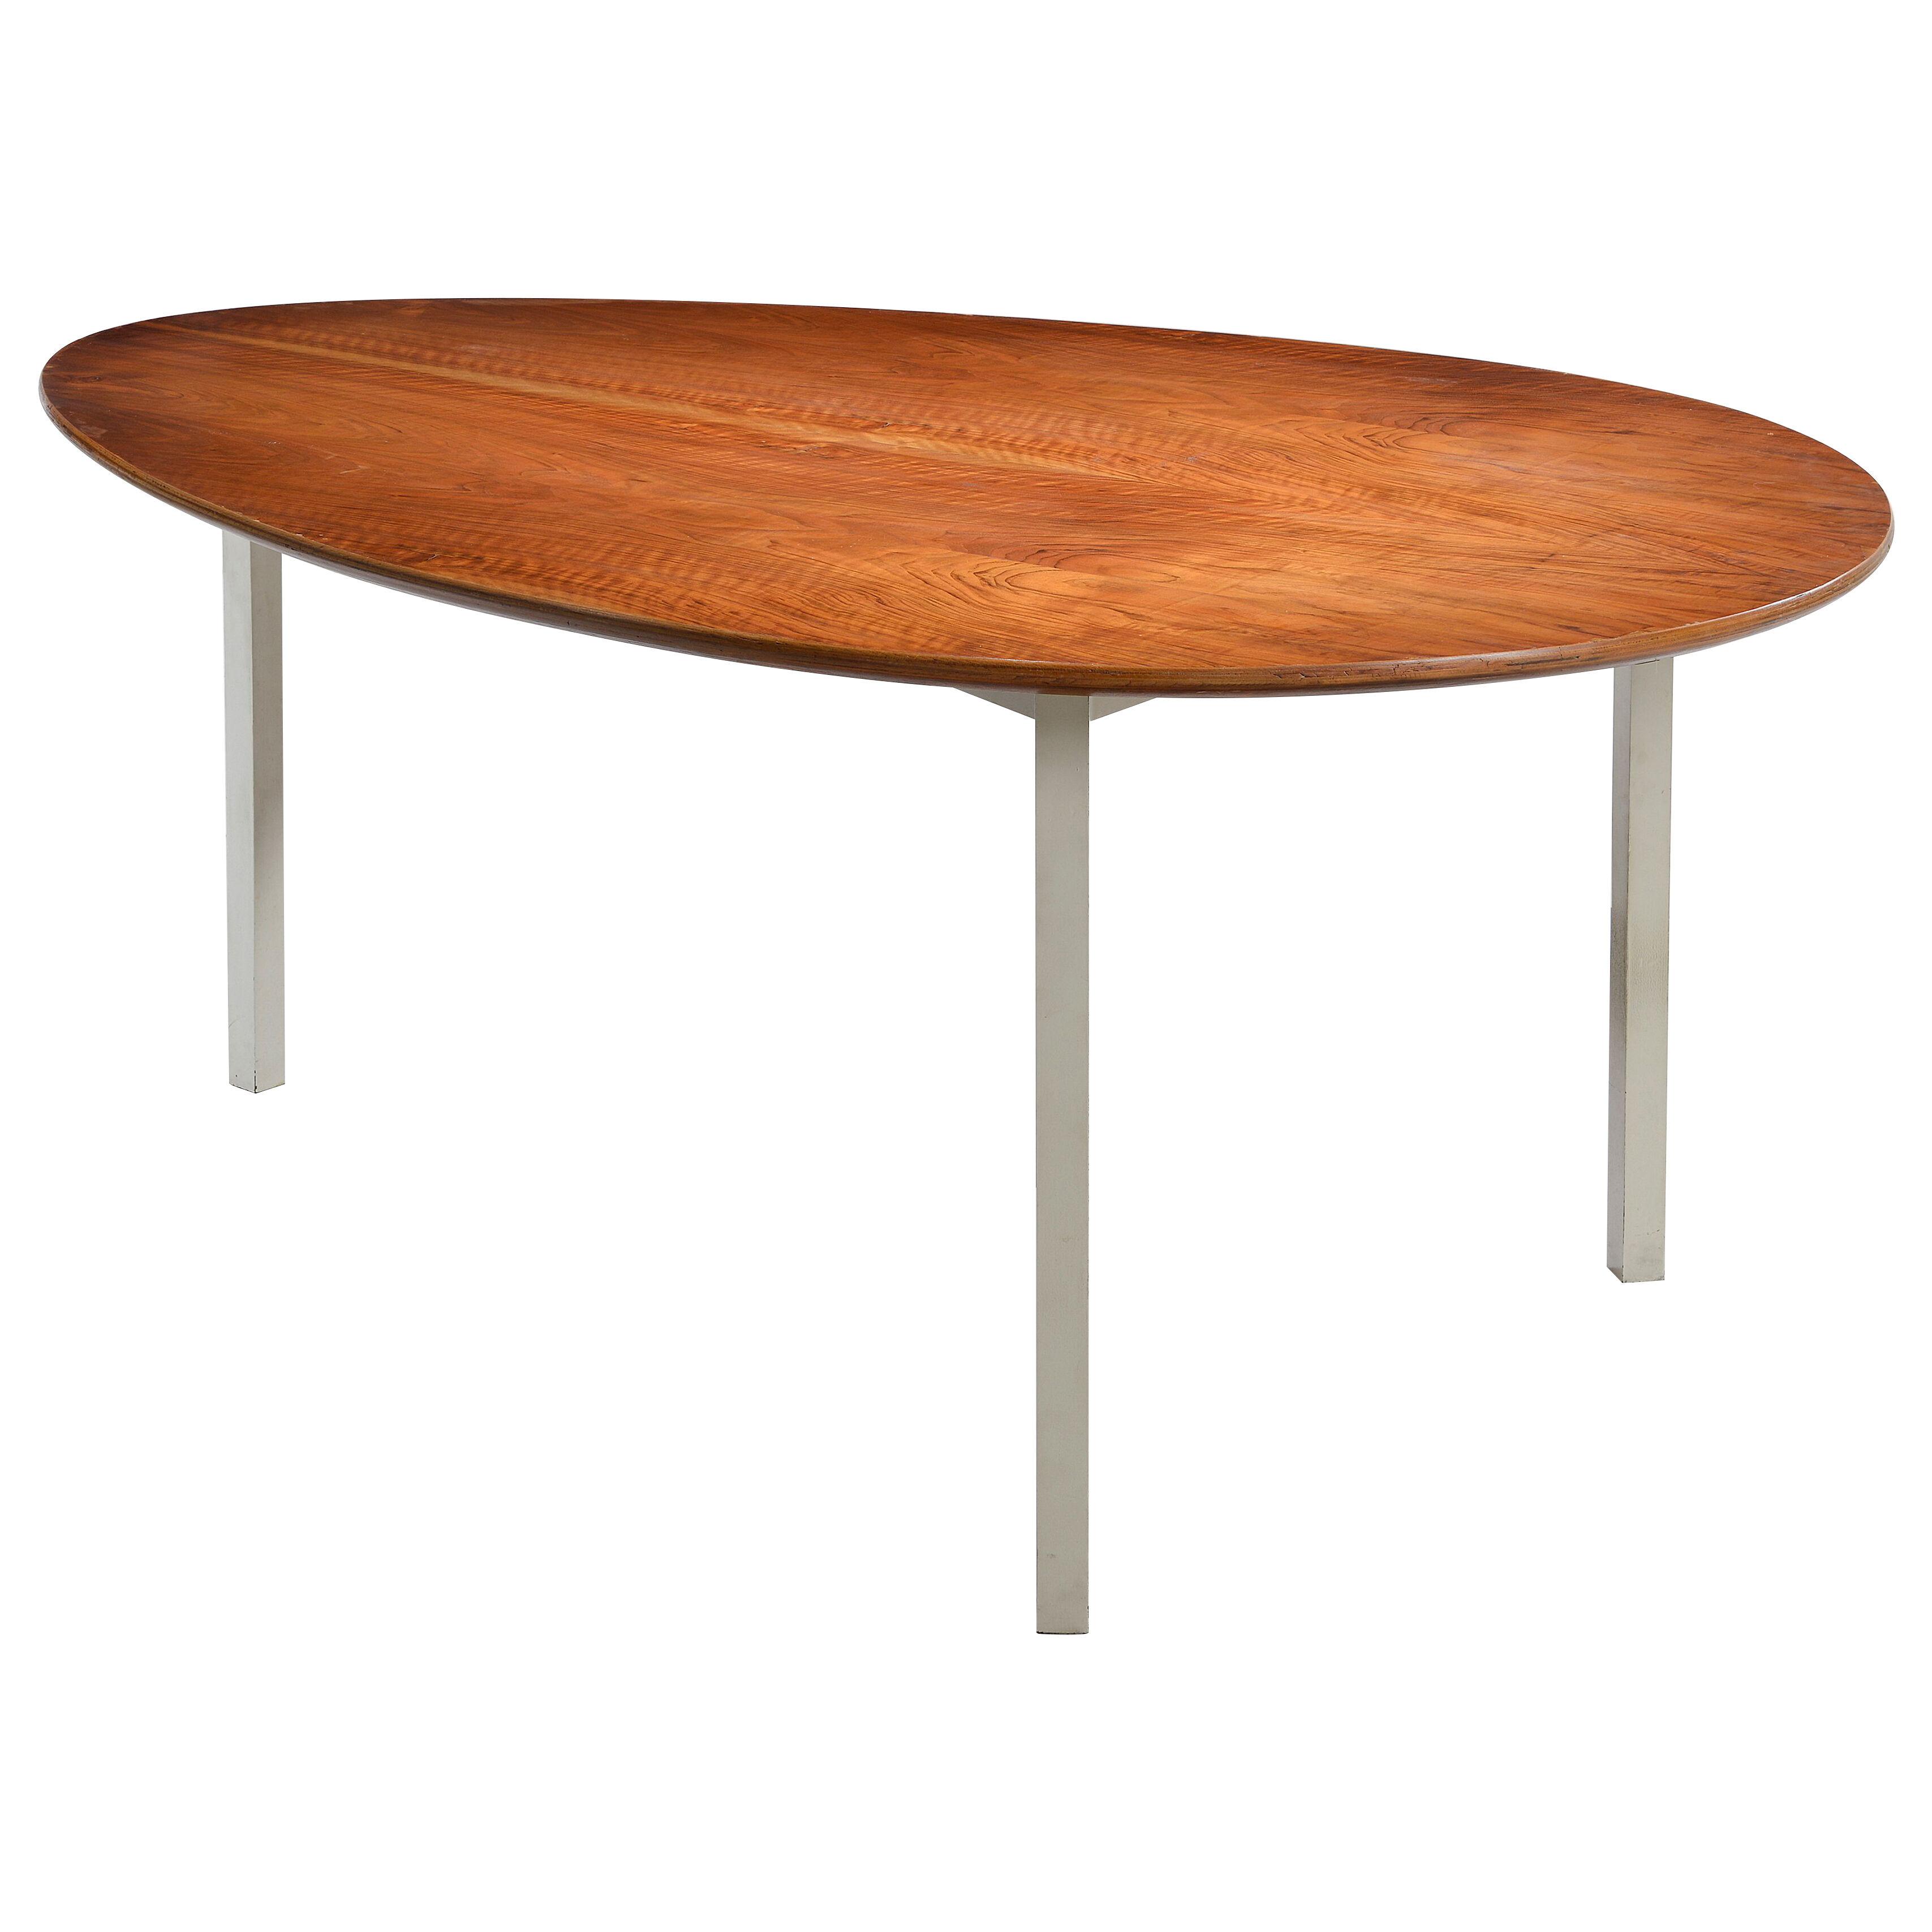 Modernist Dining table in palisander by Carlo Graffi and Franco Campo.